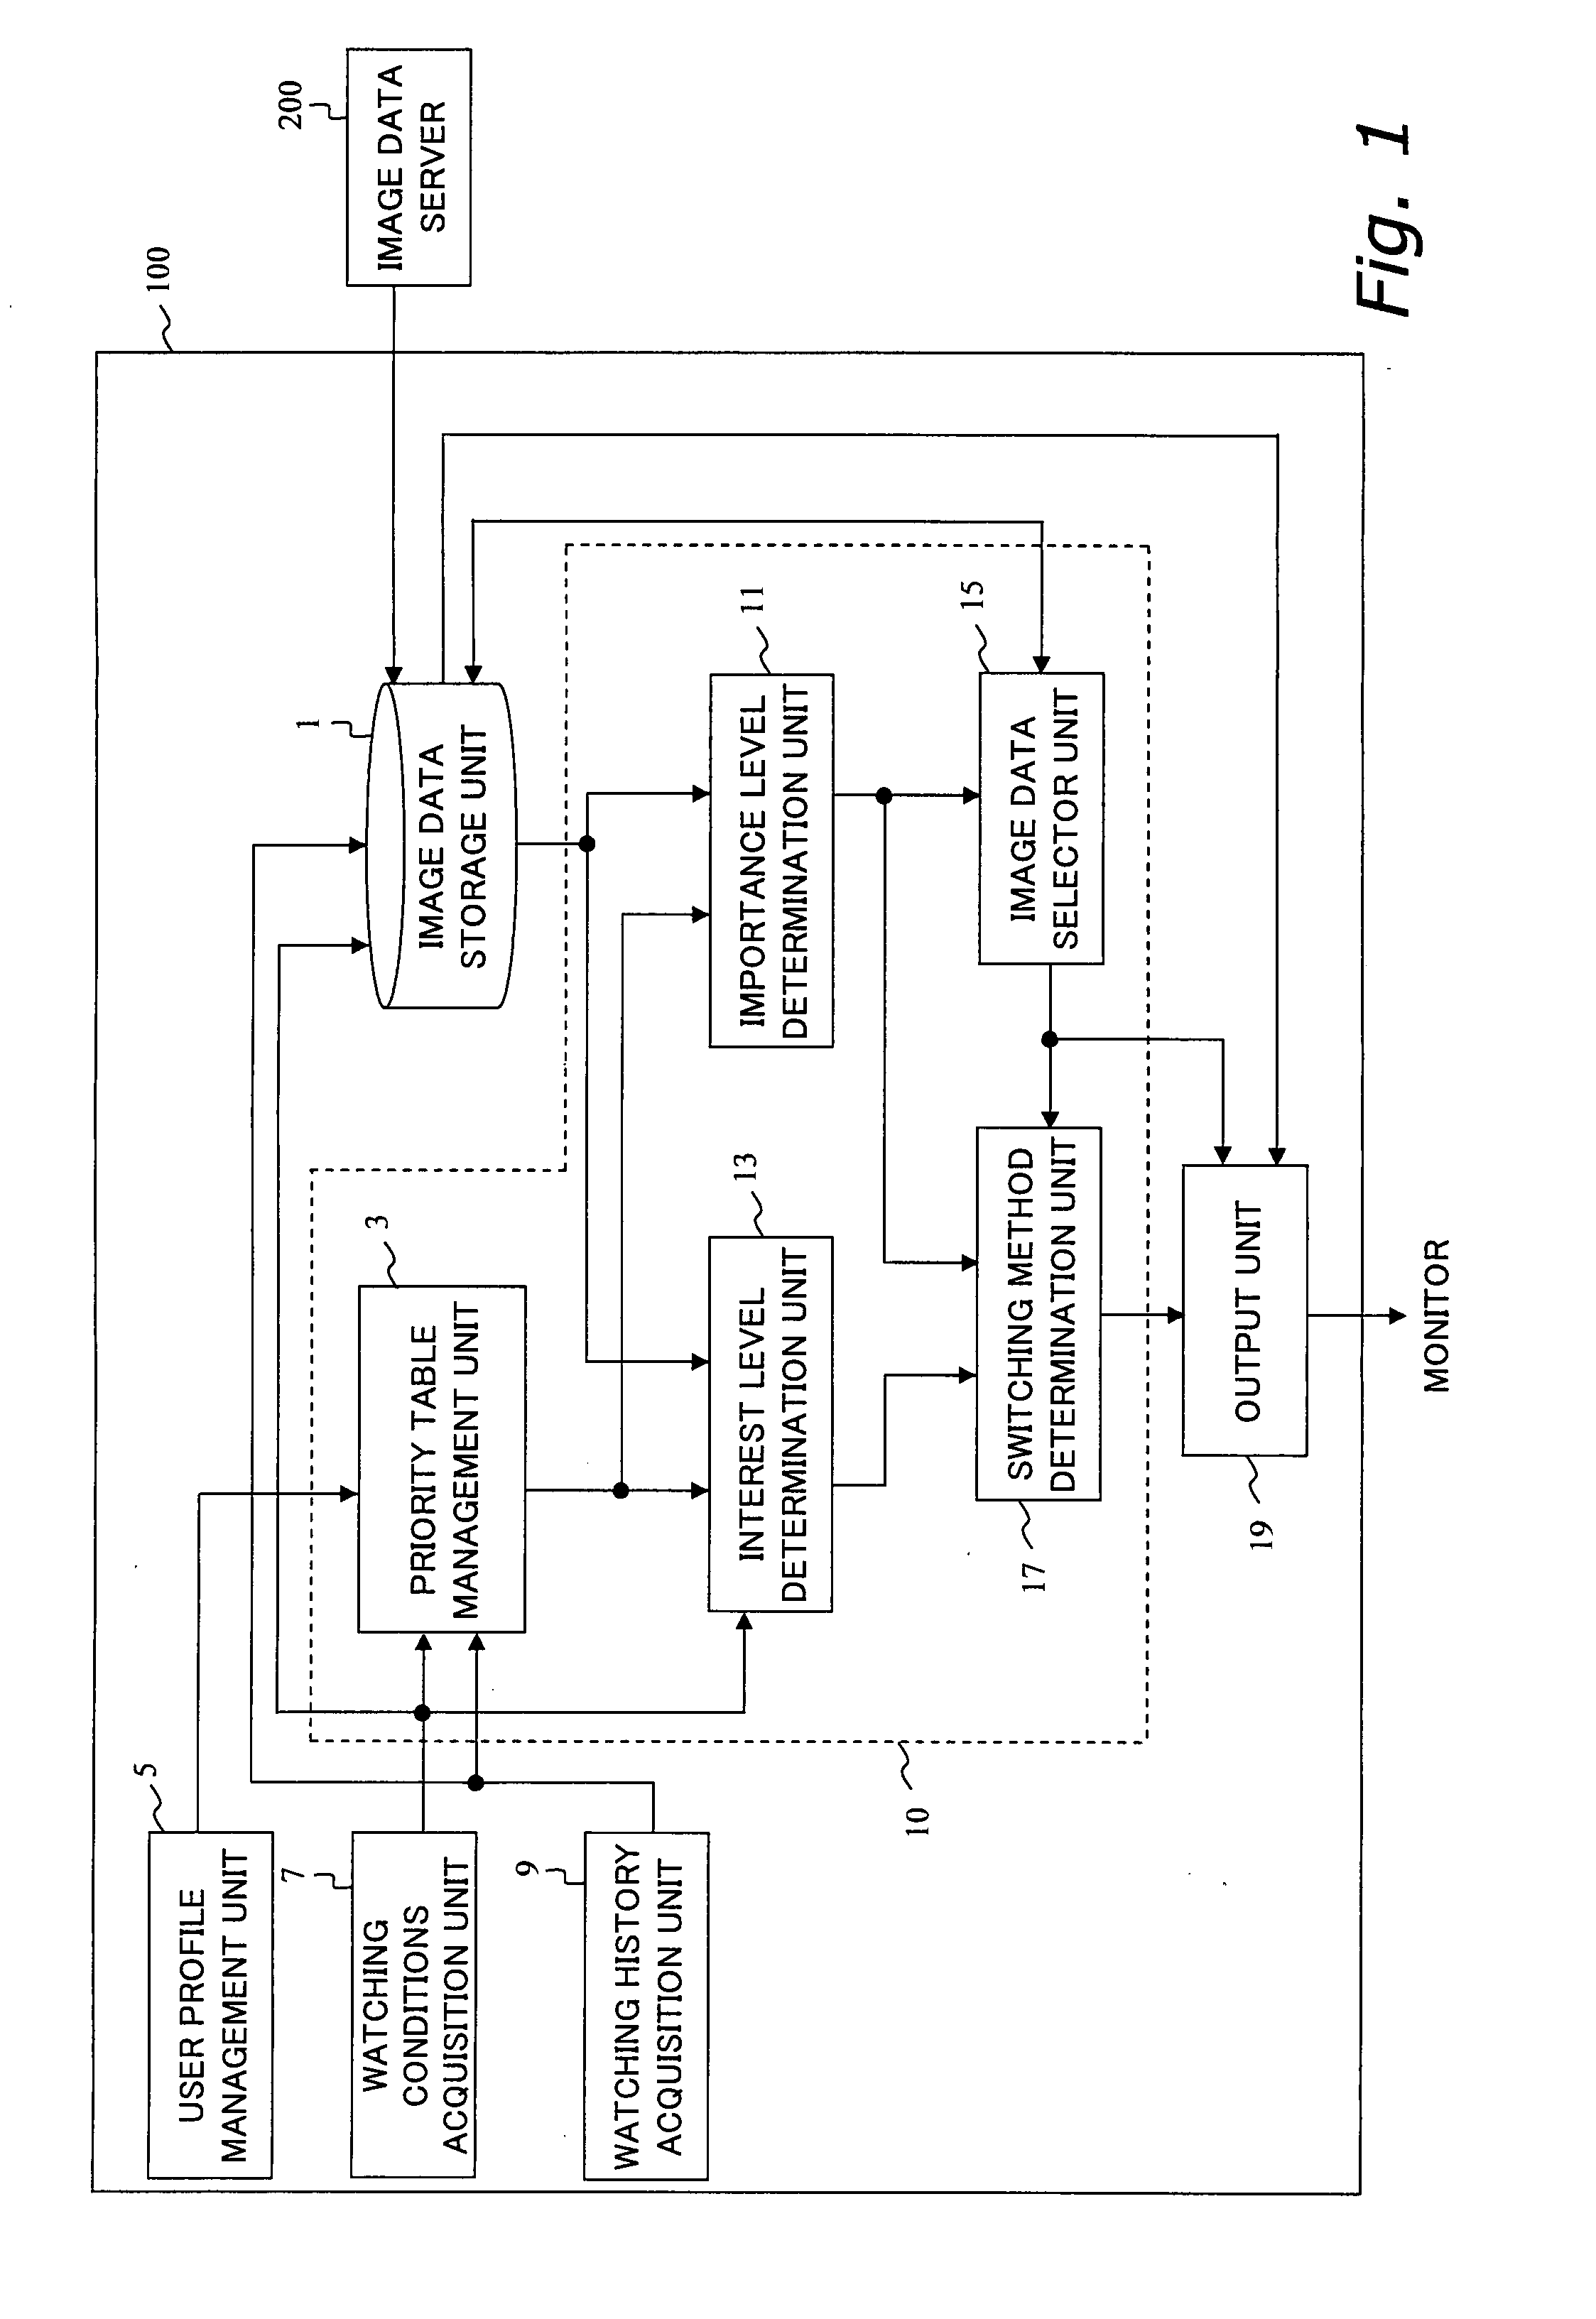 Device and method for switching between image data objects